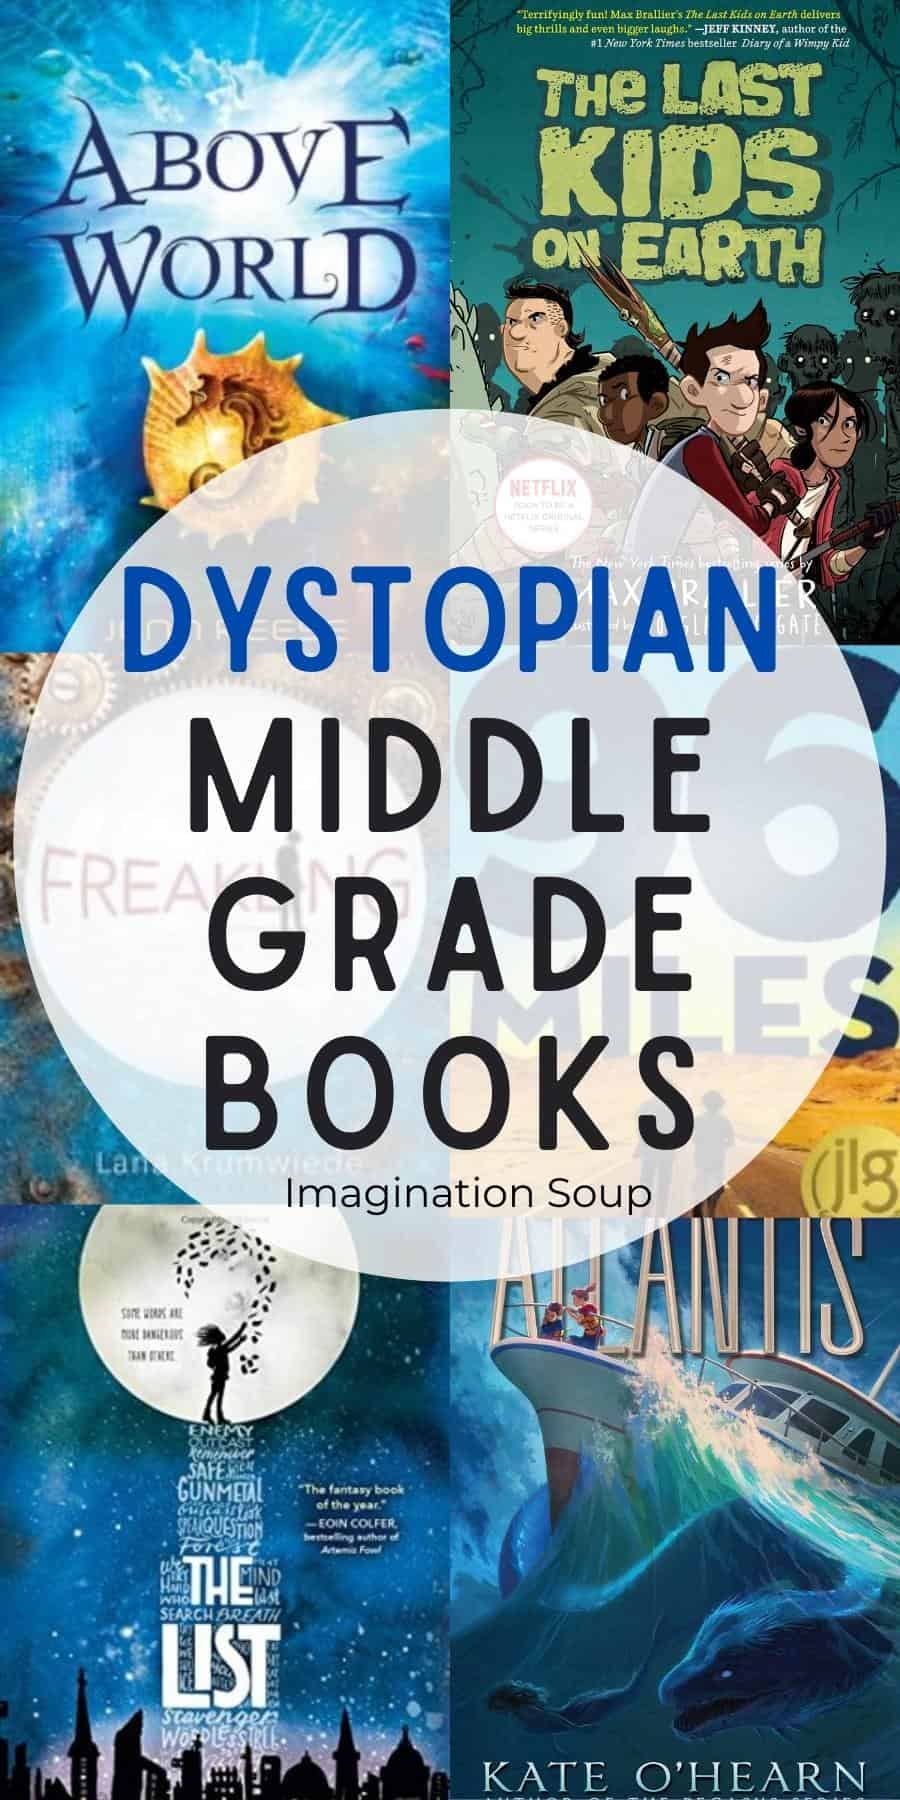 You've probably read a dystopian novel or two in high school. Remember 1984 and Fahrenheit 451? The dystopian genre gets kids reading a LOT. Although there are more young adult (YA) dystopian novels than middle-grade, don't worry-- there are many great middle grade choices, too. Since this is one of my favorite sub-genres of science fiction, let me introduce you to the best books for your tween children ages 9 - 12.